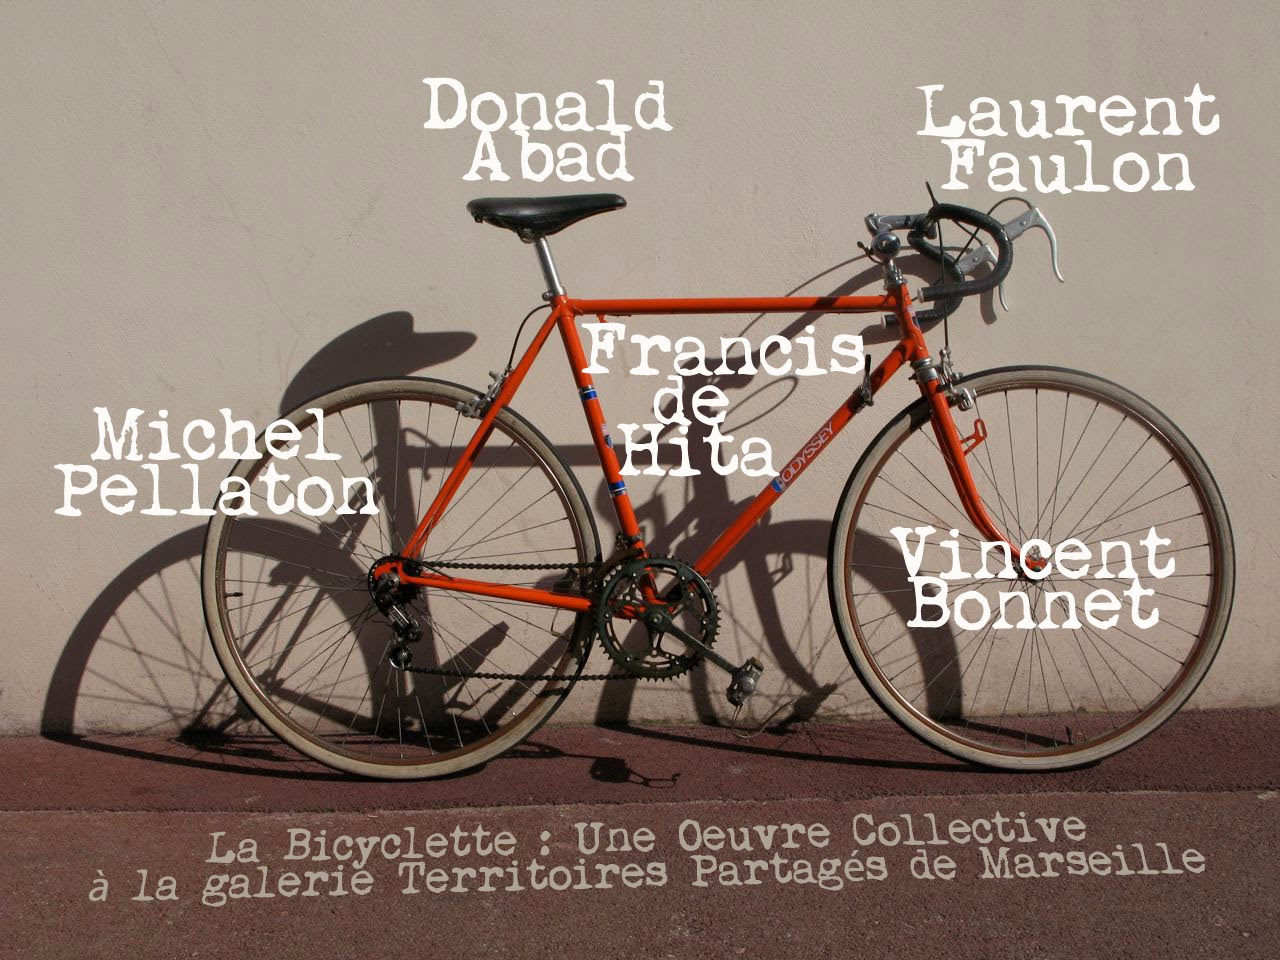 La Bicyclette " Une oeuvre collective"